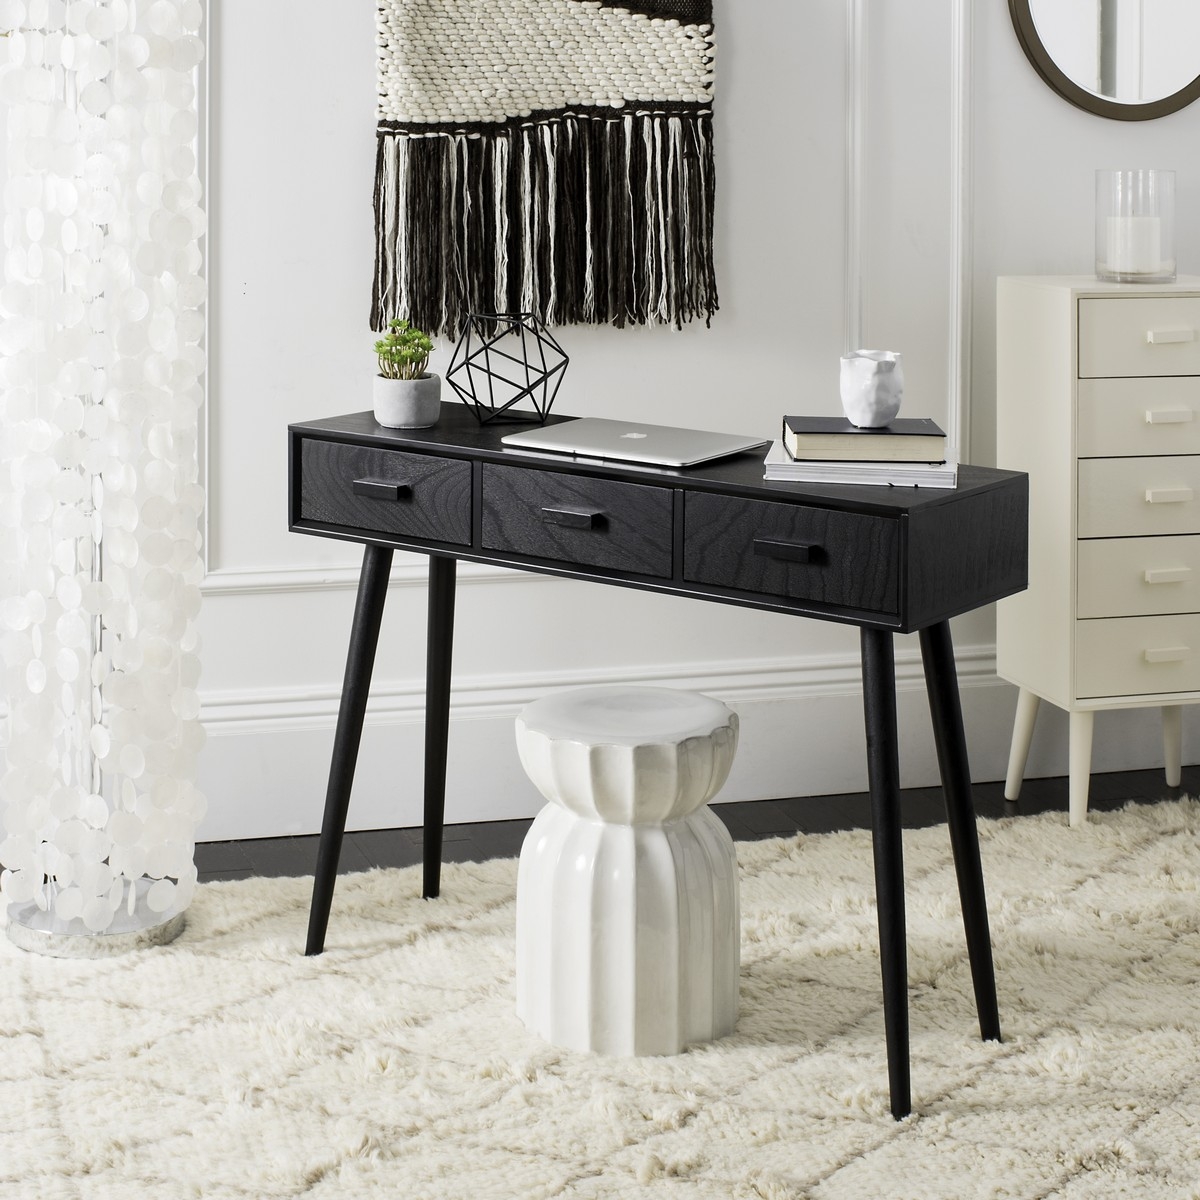 Albus 3 Drawer Console Table - Black - Arlo Home - Image 2